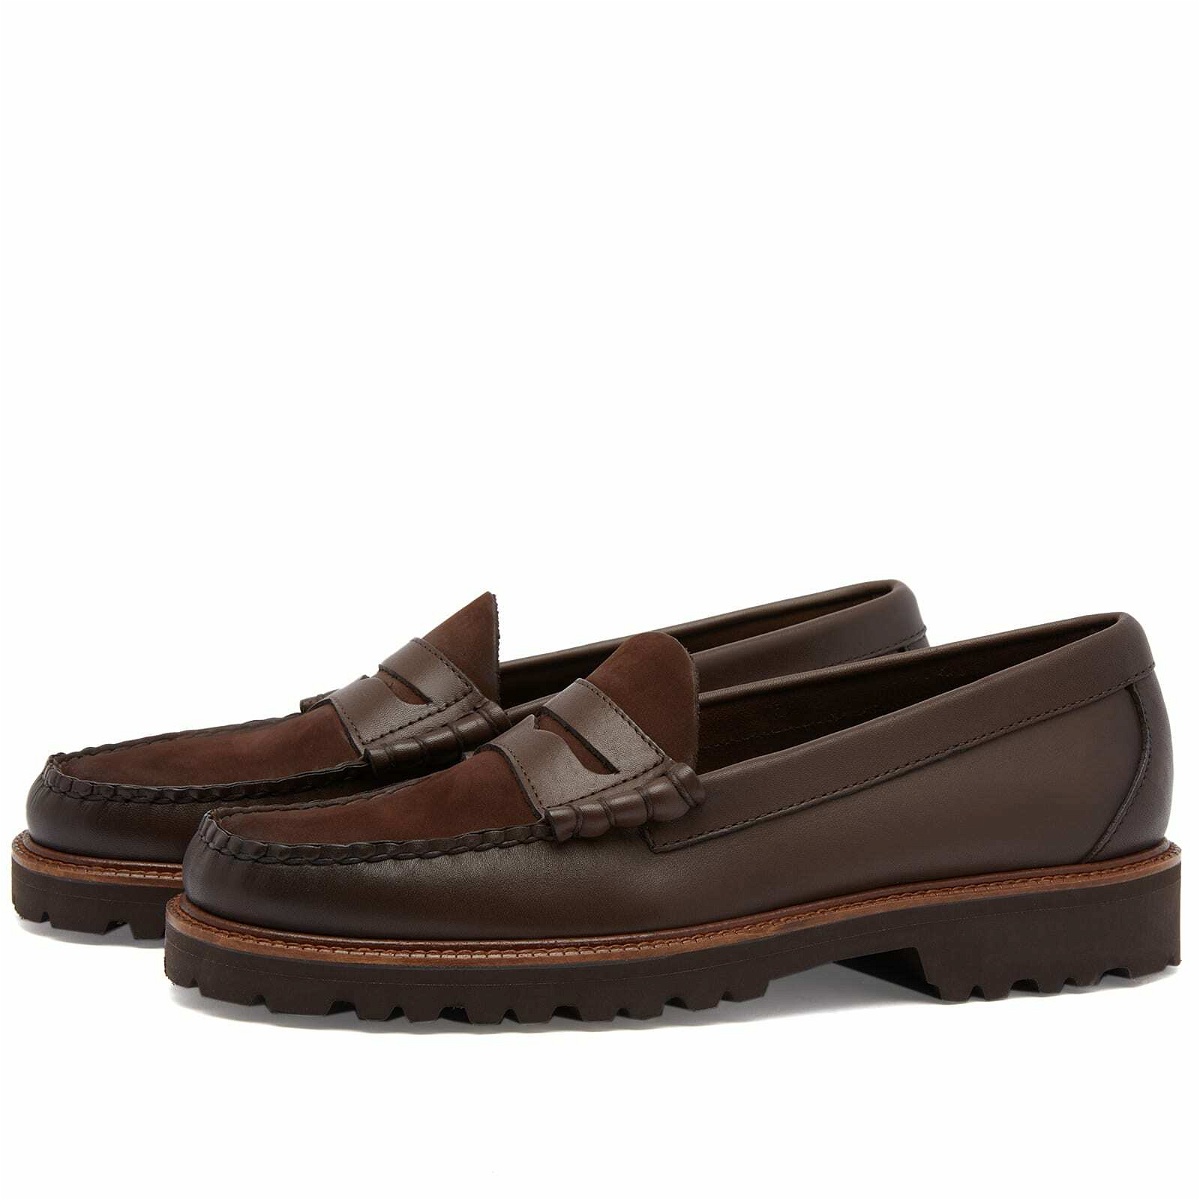 Bass Weejuns Men's Larson 90s Soft Penny Loafer in Chocolate Leather ...